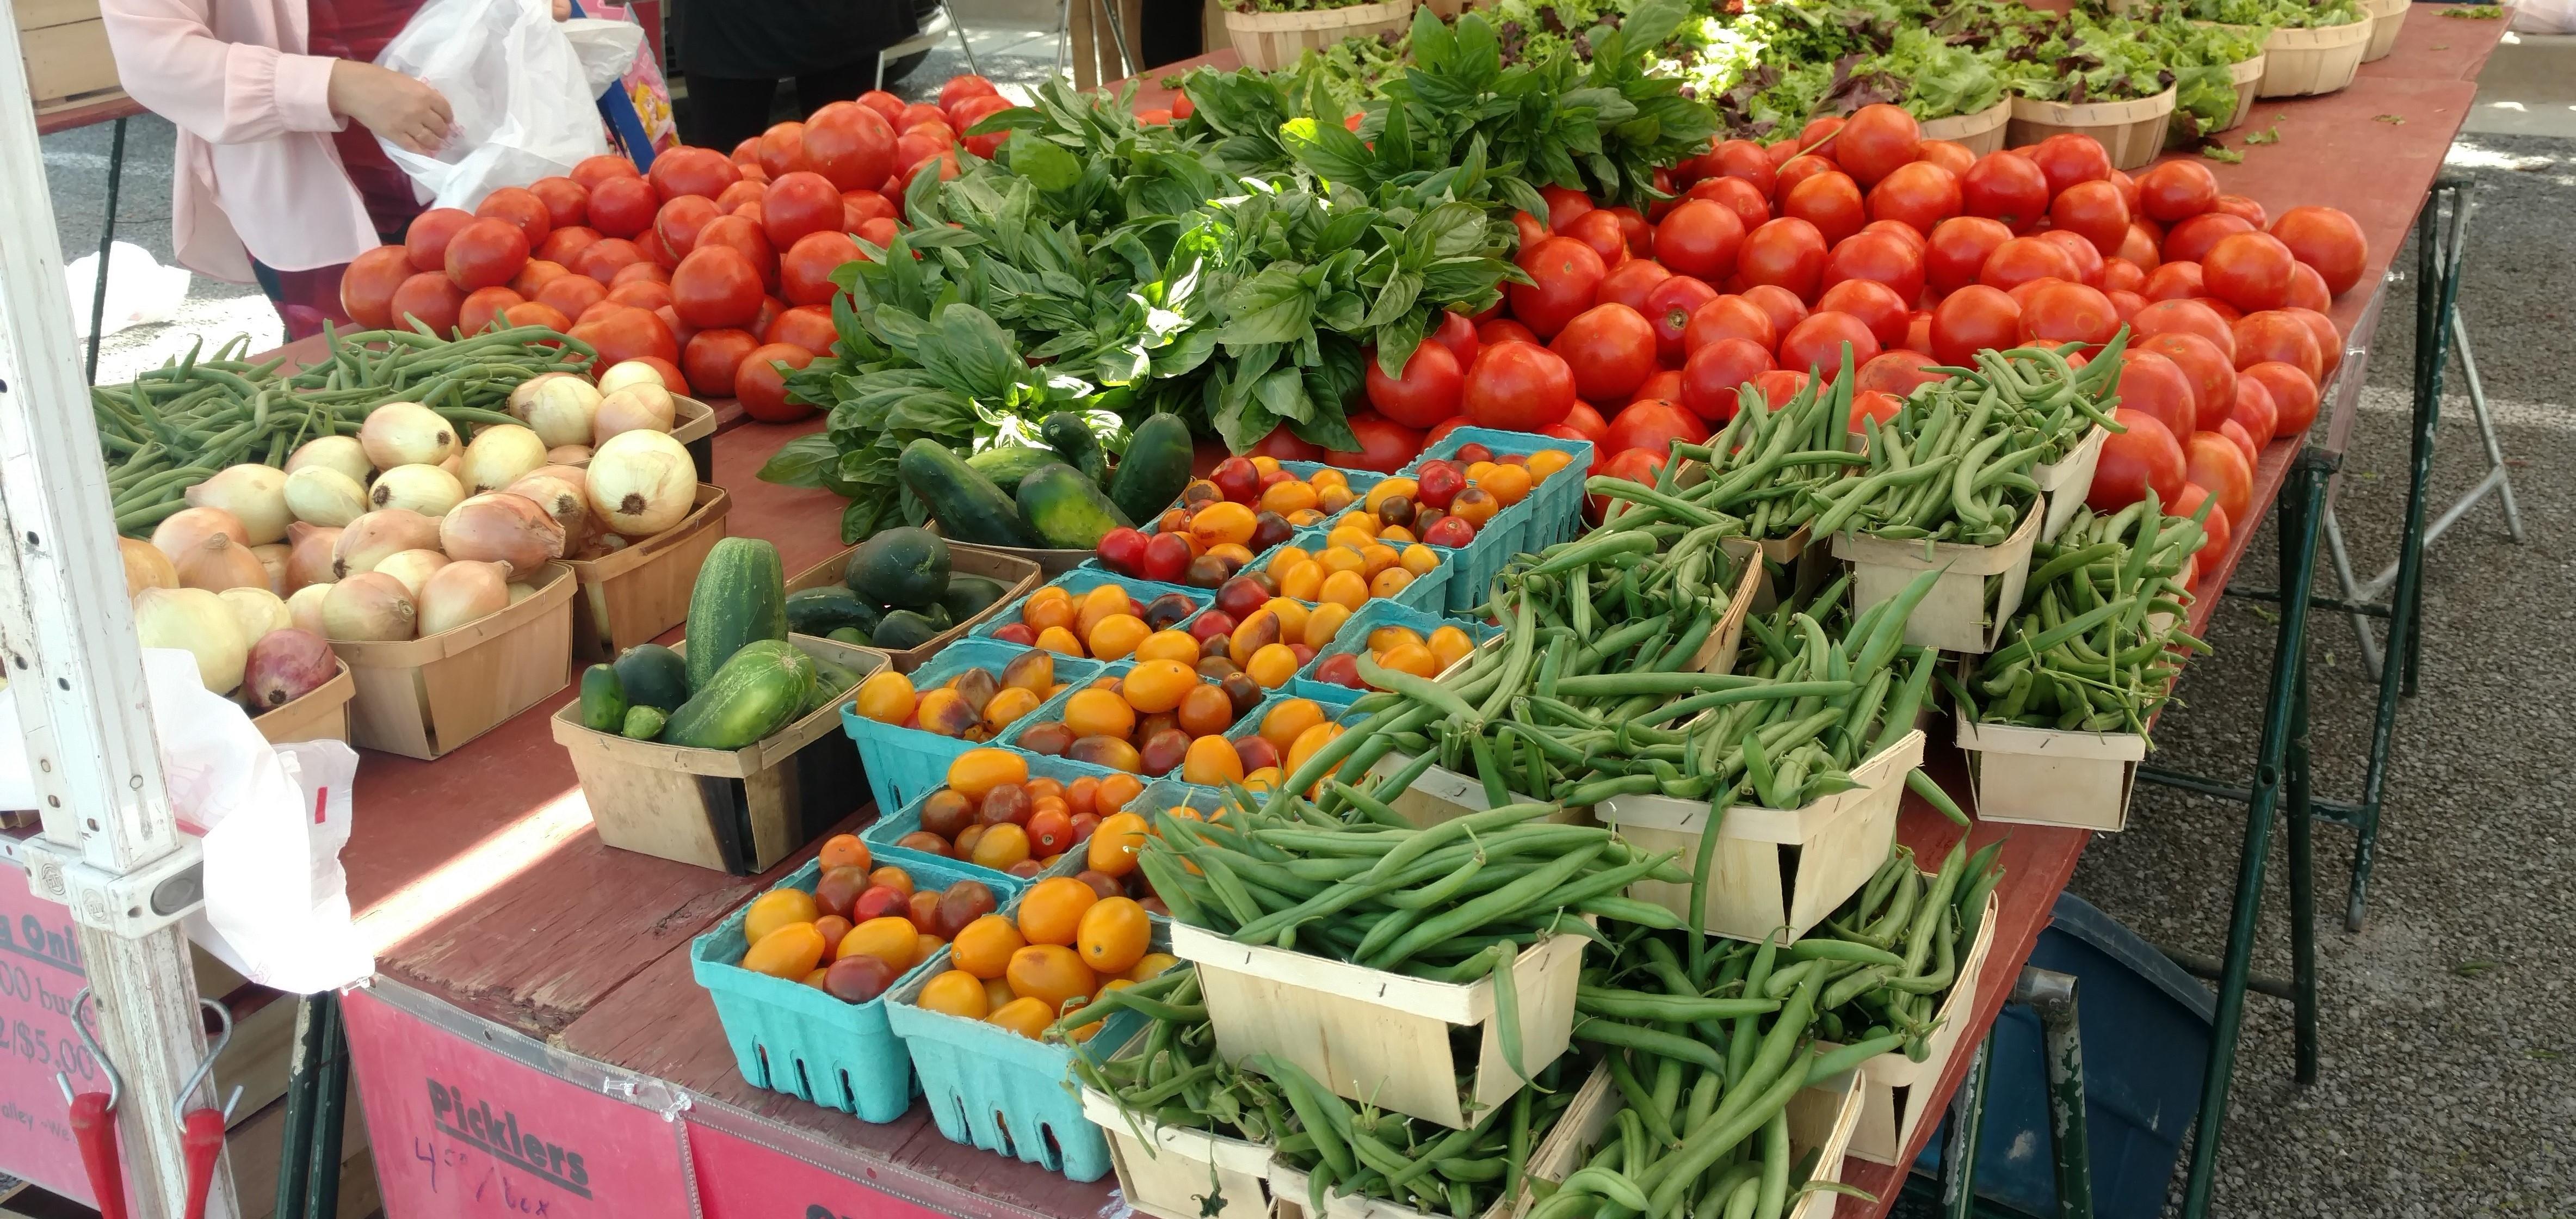 Display of fruits and vegetables at the farmers market.